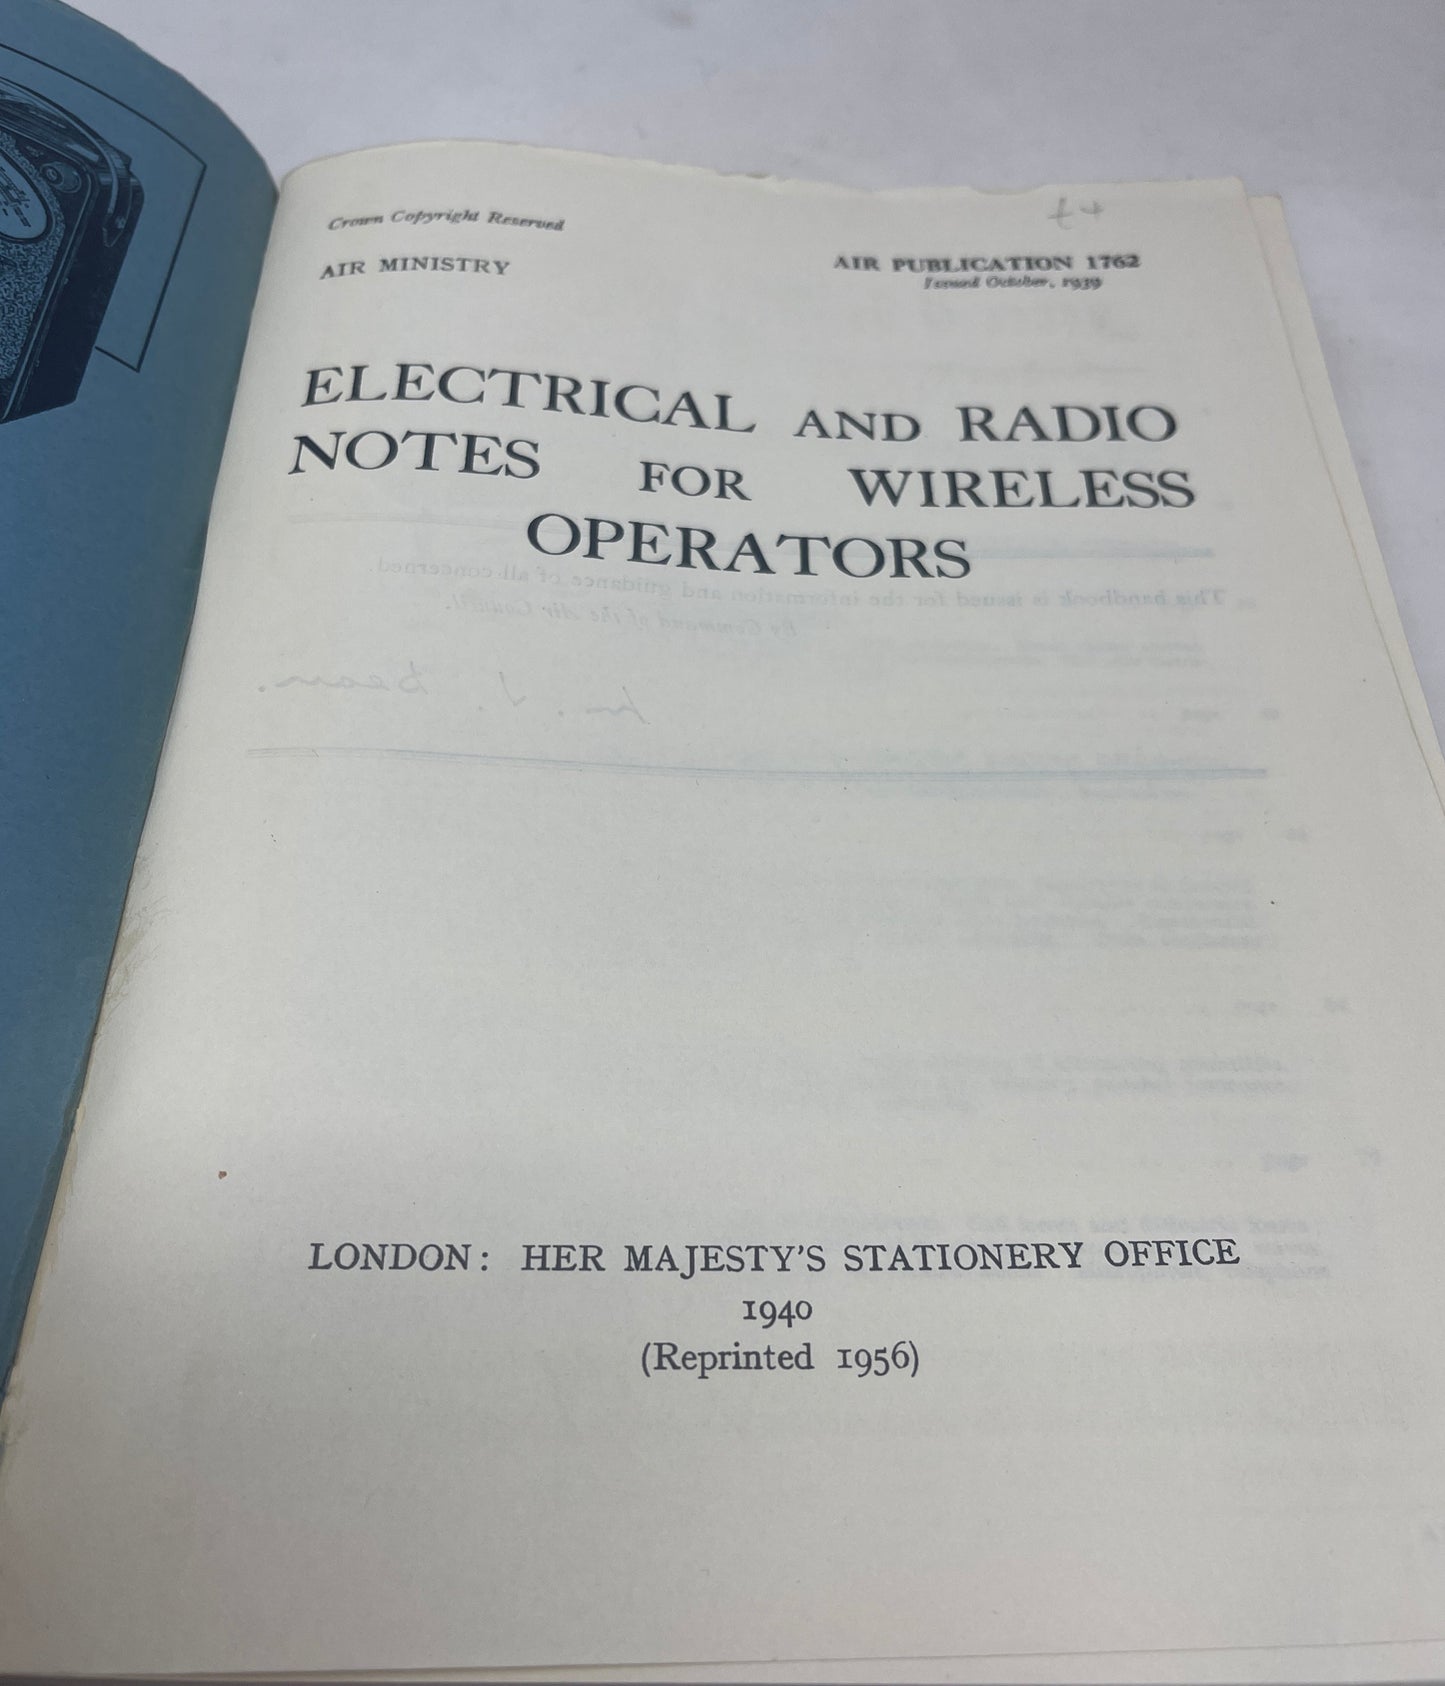 Original Air Publication 1762 Electrical and Radio Notes for Wireless Operators HMSO 1940 reprinted 1956. This manual is in excellent condition for its age. There are no pages missing or visible marks 